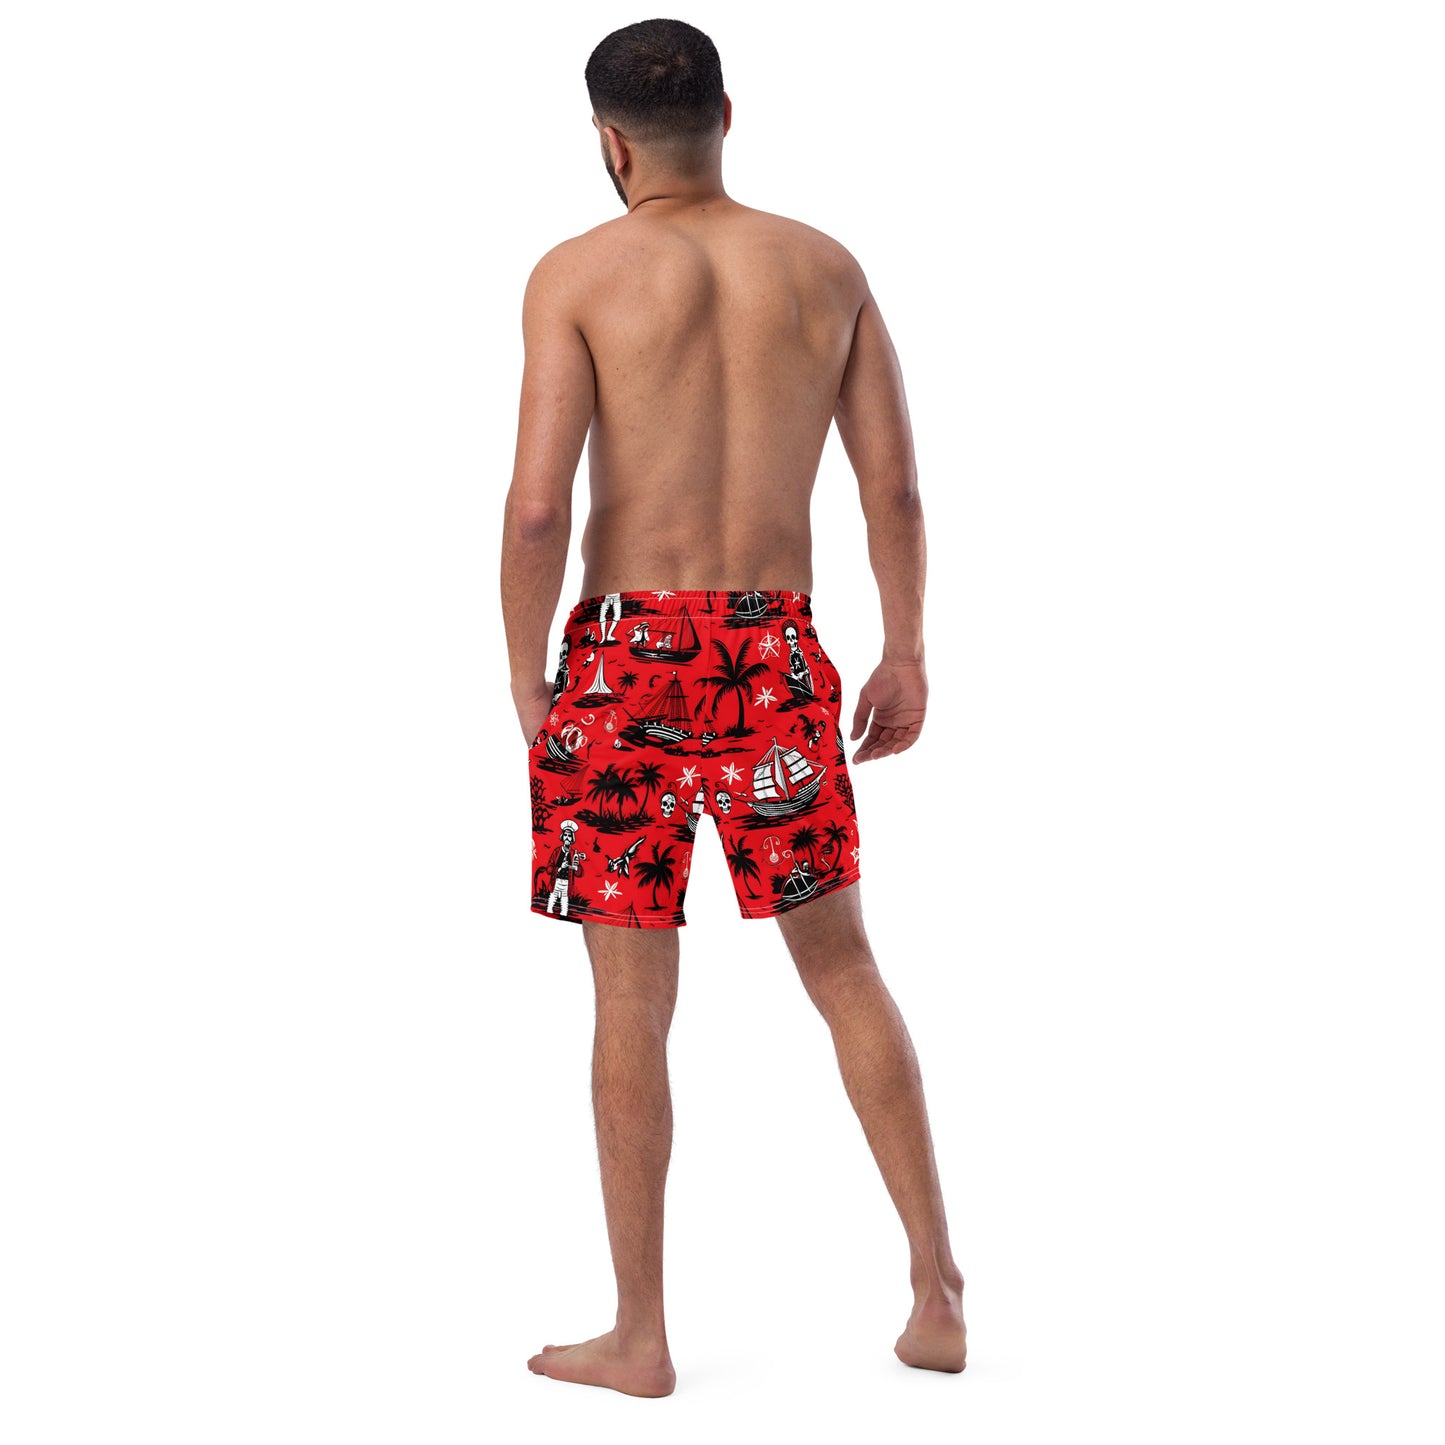 SPRROW: Pirate-Themed Men's Swim Trunks: Conquer the Seas in Style